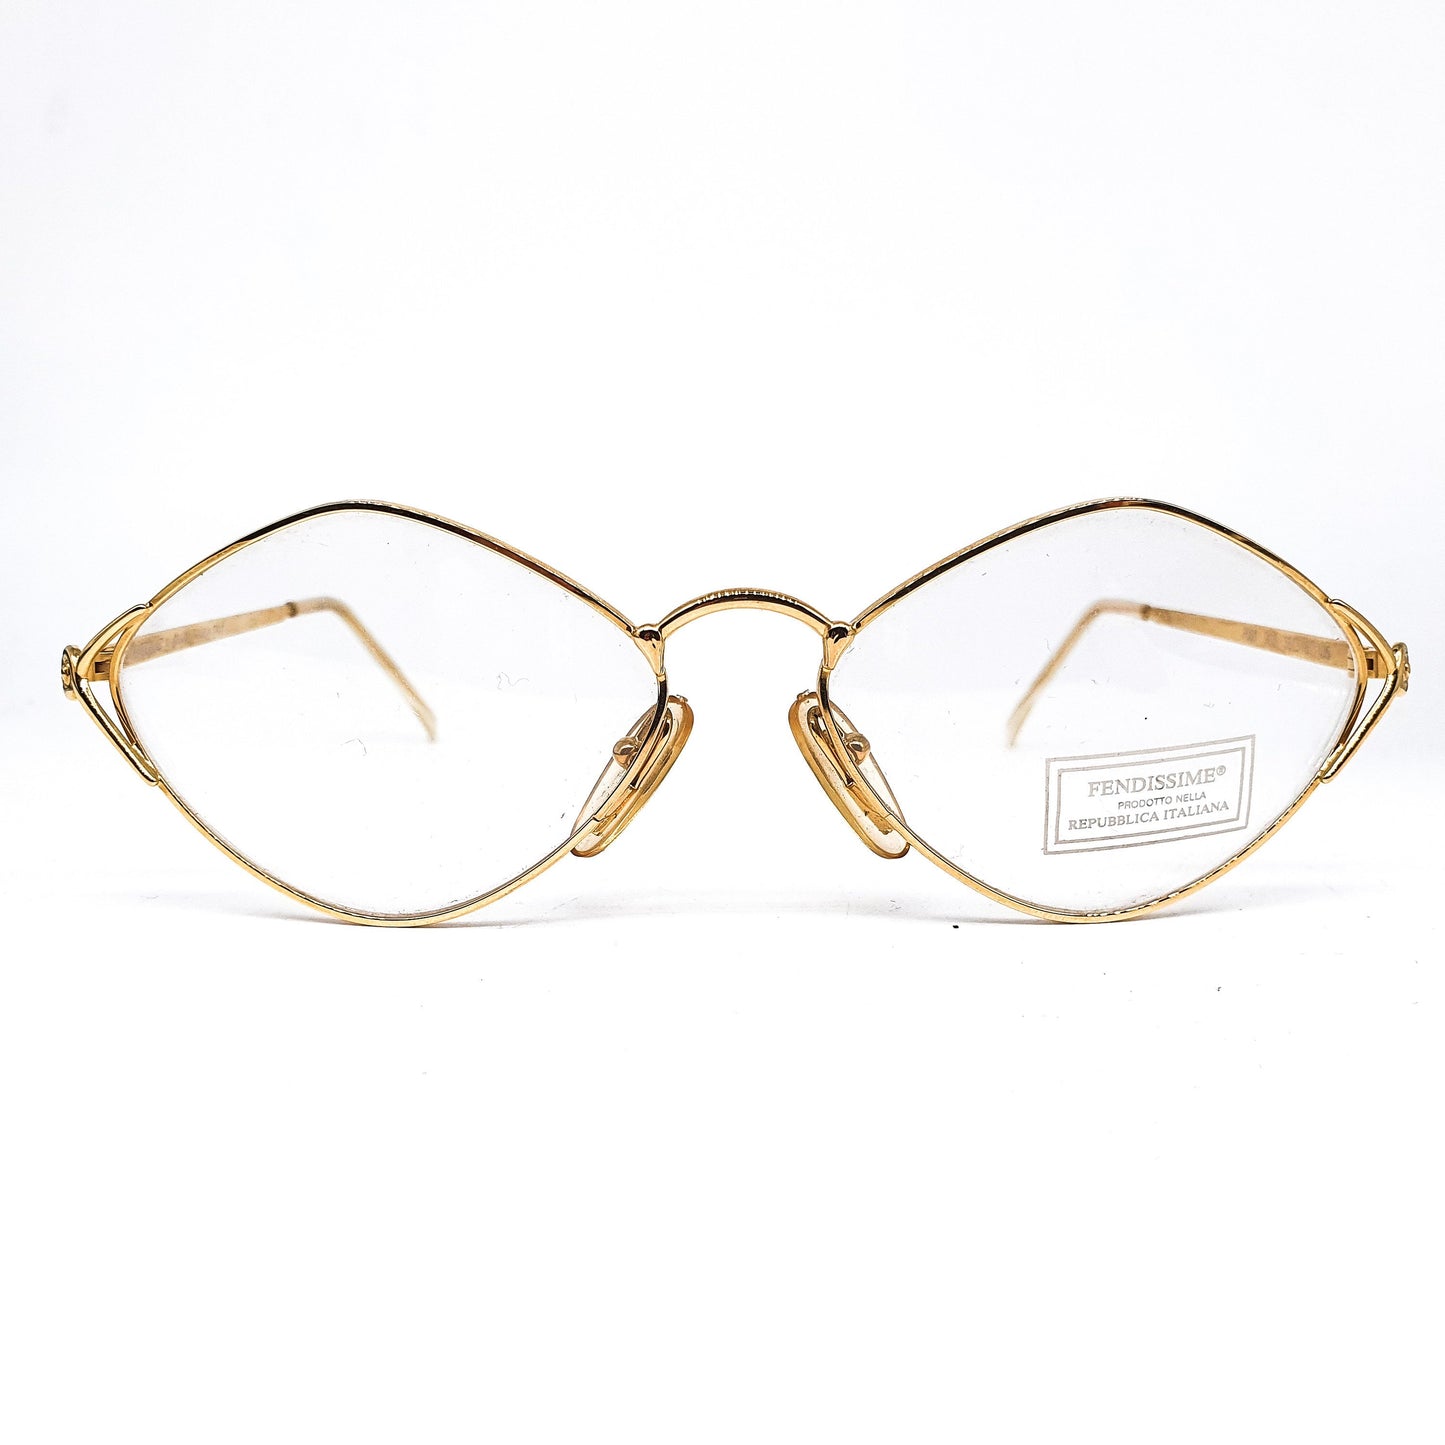 Fendi satin gold rhombus shaped frames, coolest minimalist design made in Italy, 1990s NOs